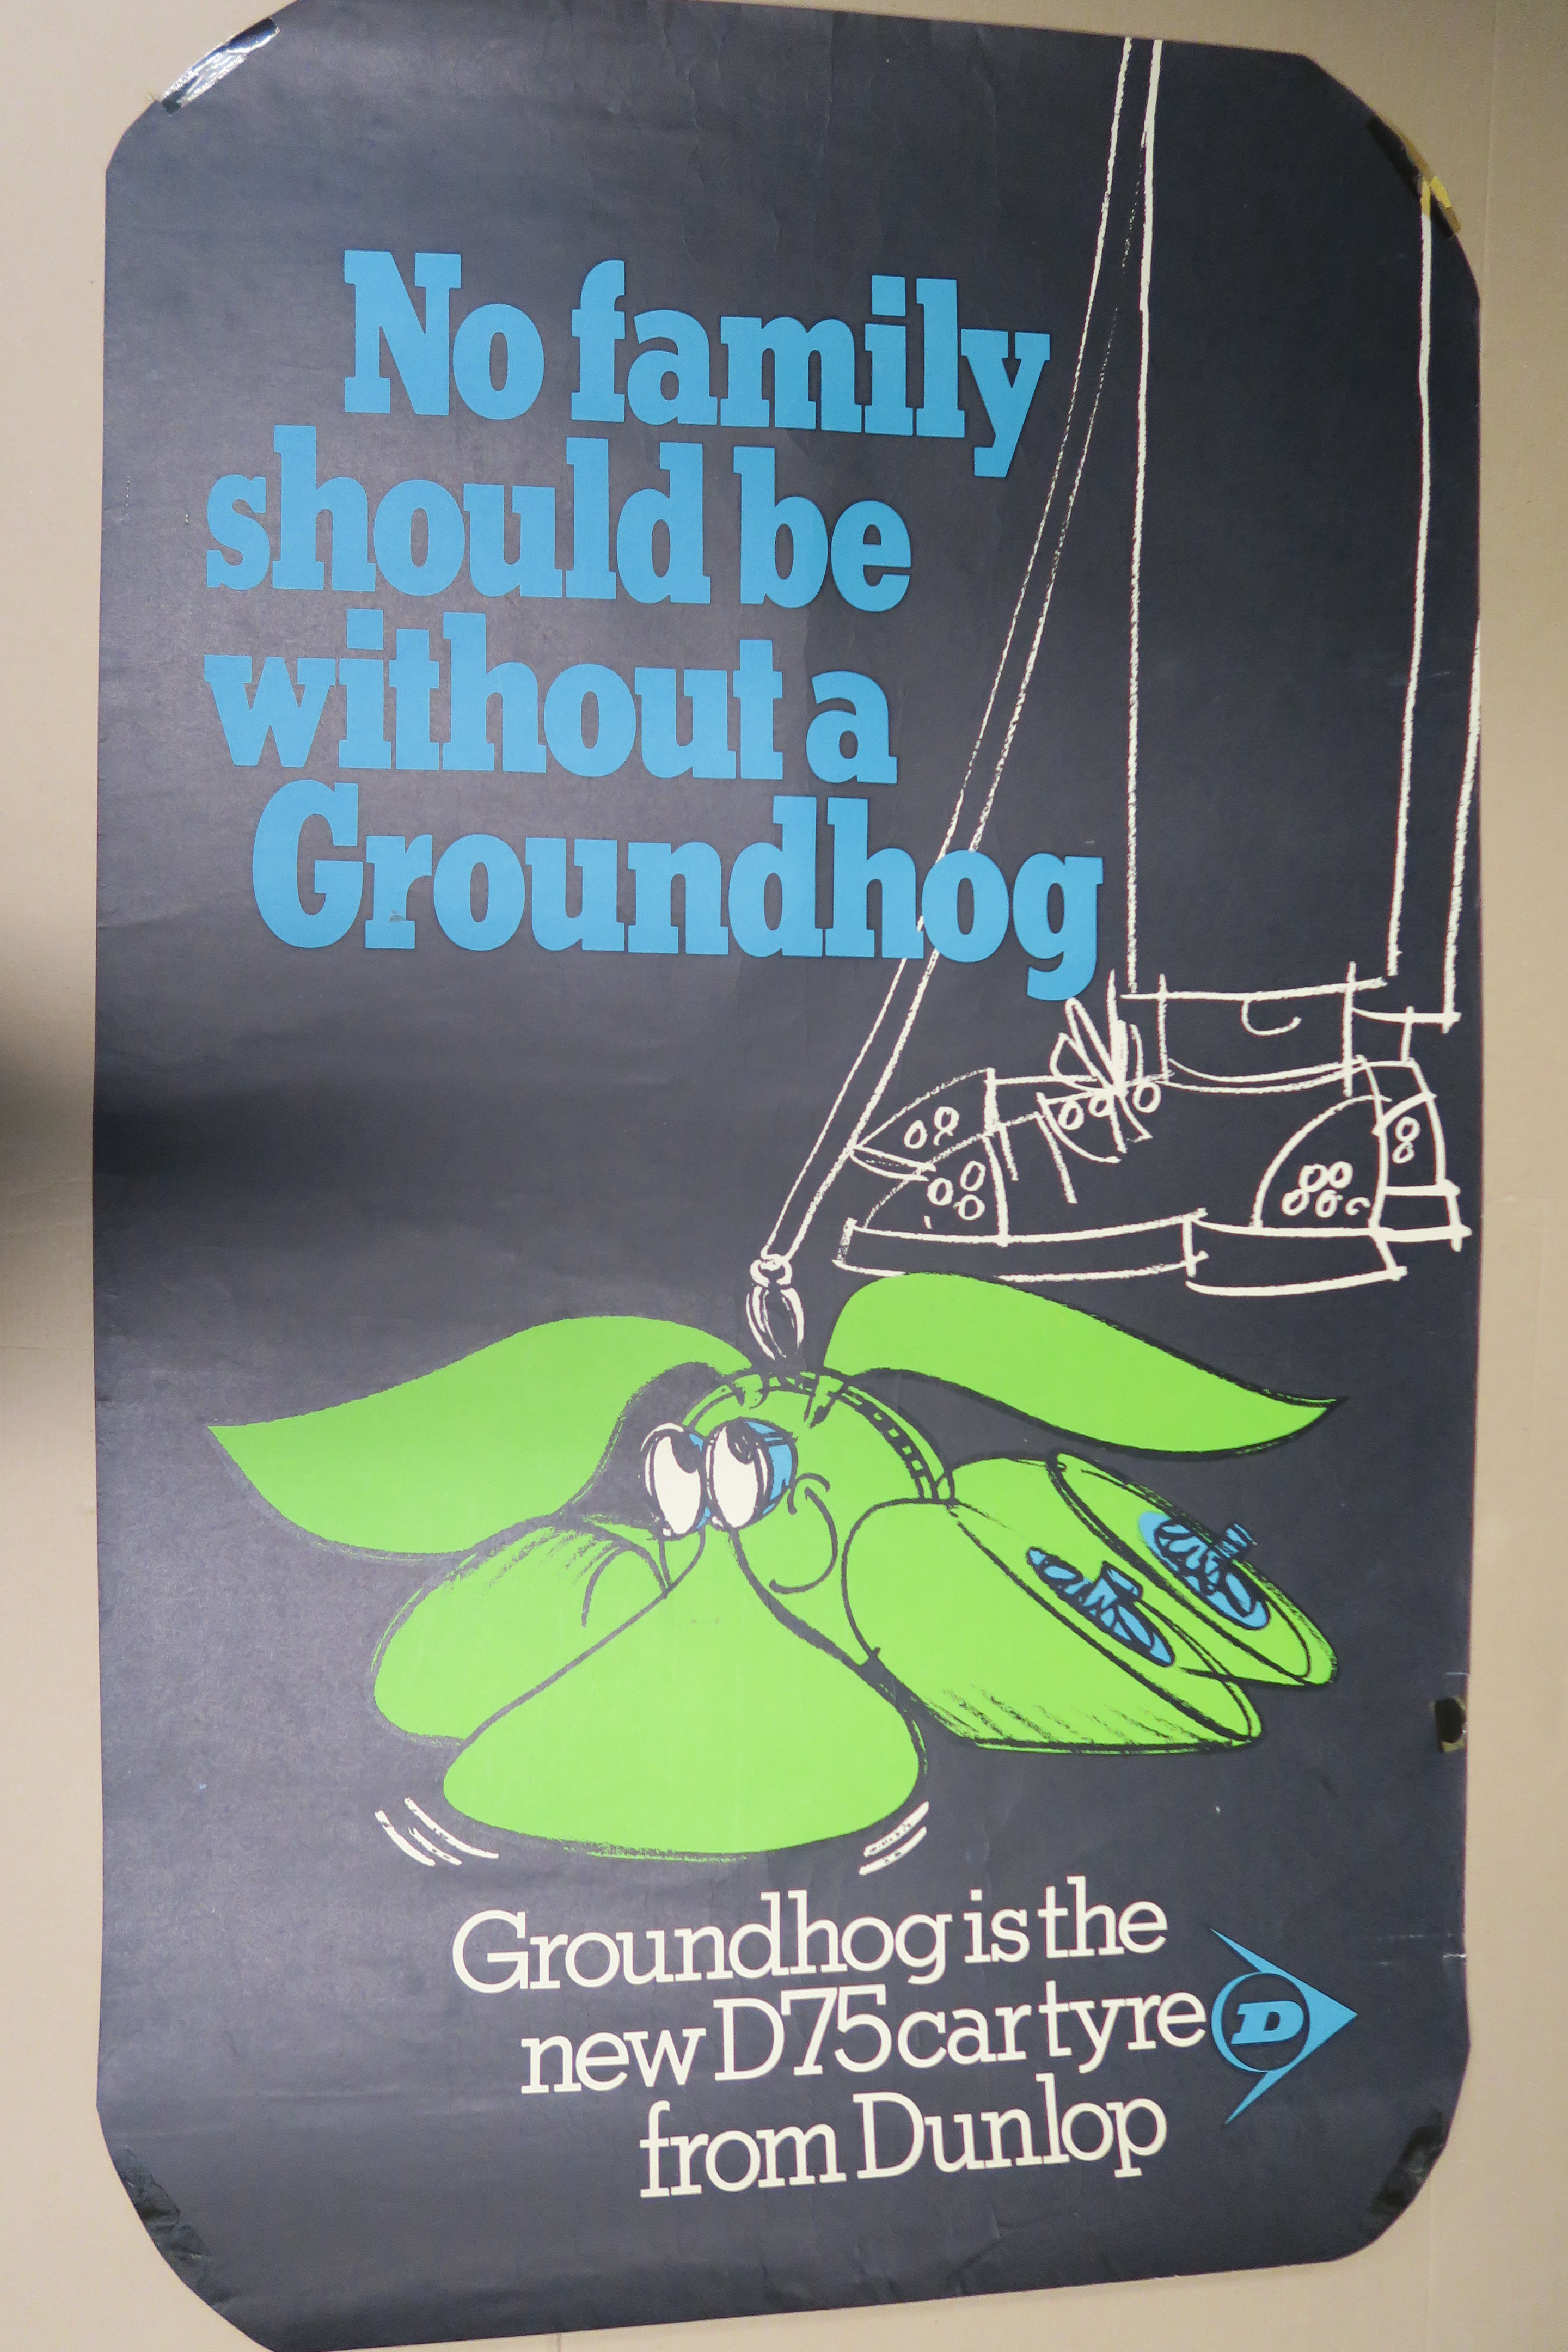 Concert posters including Steve Harley (rolled), Gong (rolled), The Groundhogs (rolled), Ryan Adams. - Image 3 of 4